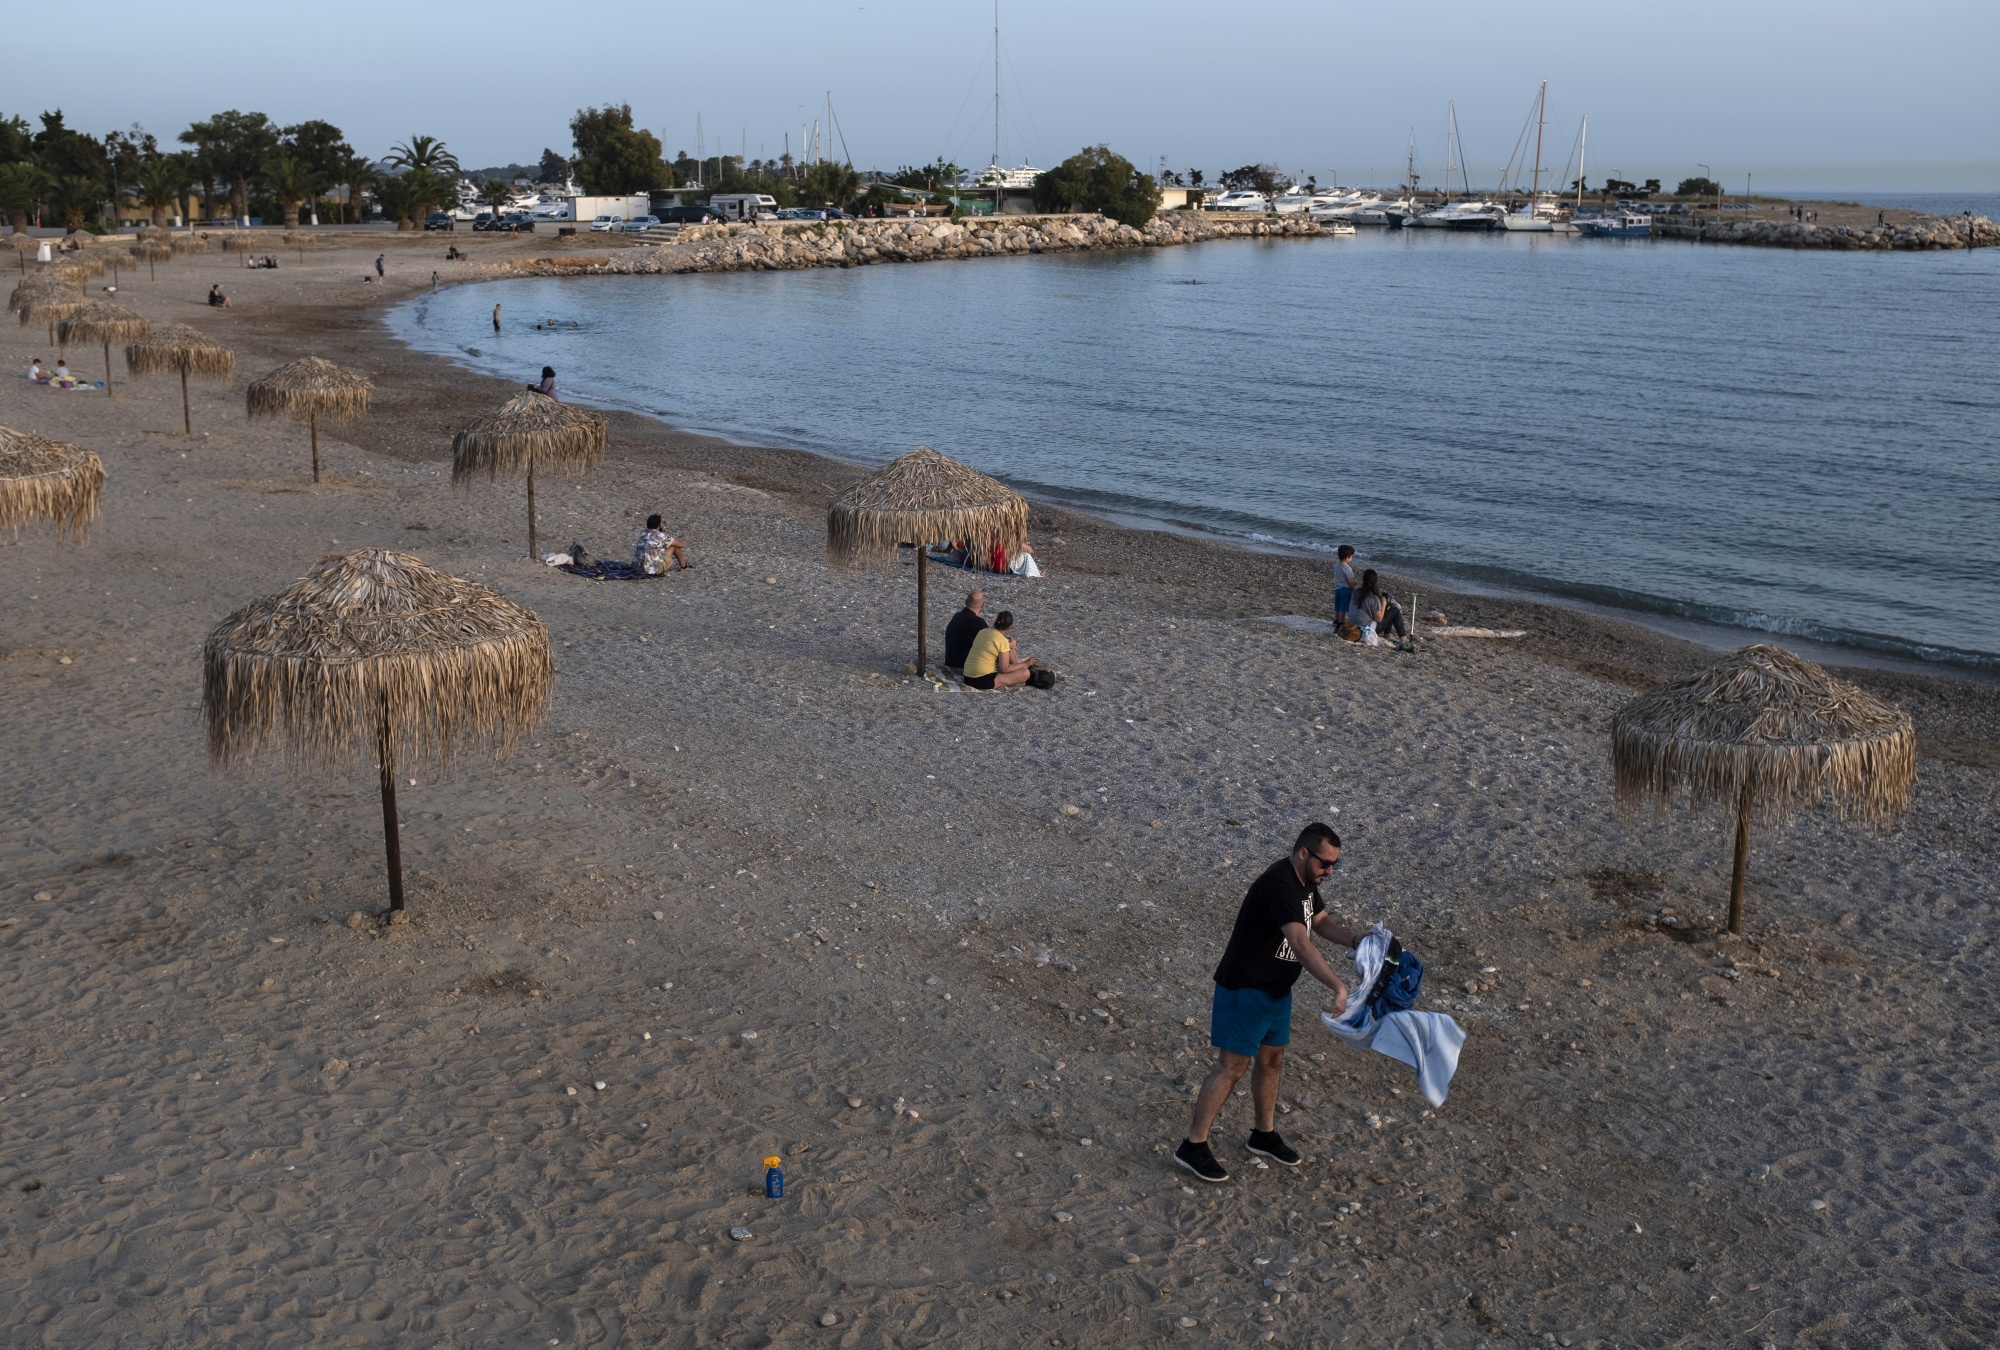 People sit on the beach on the evening in Glyfada, Greece, May 13.